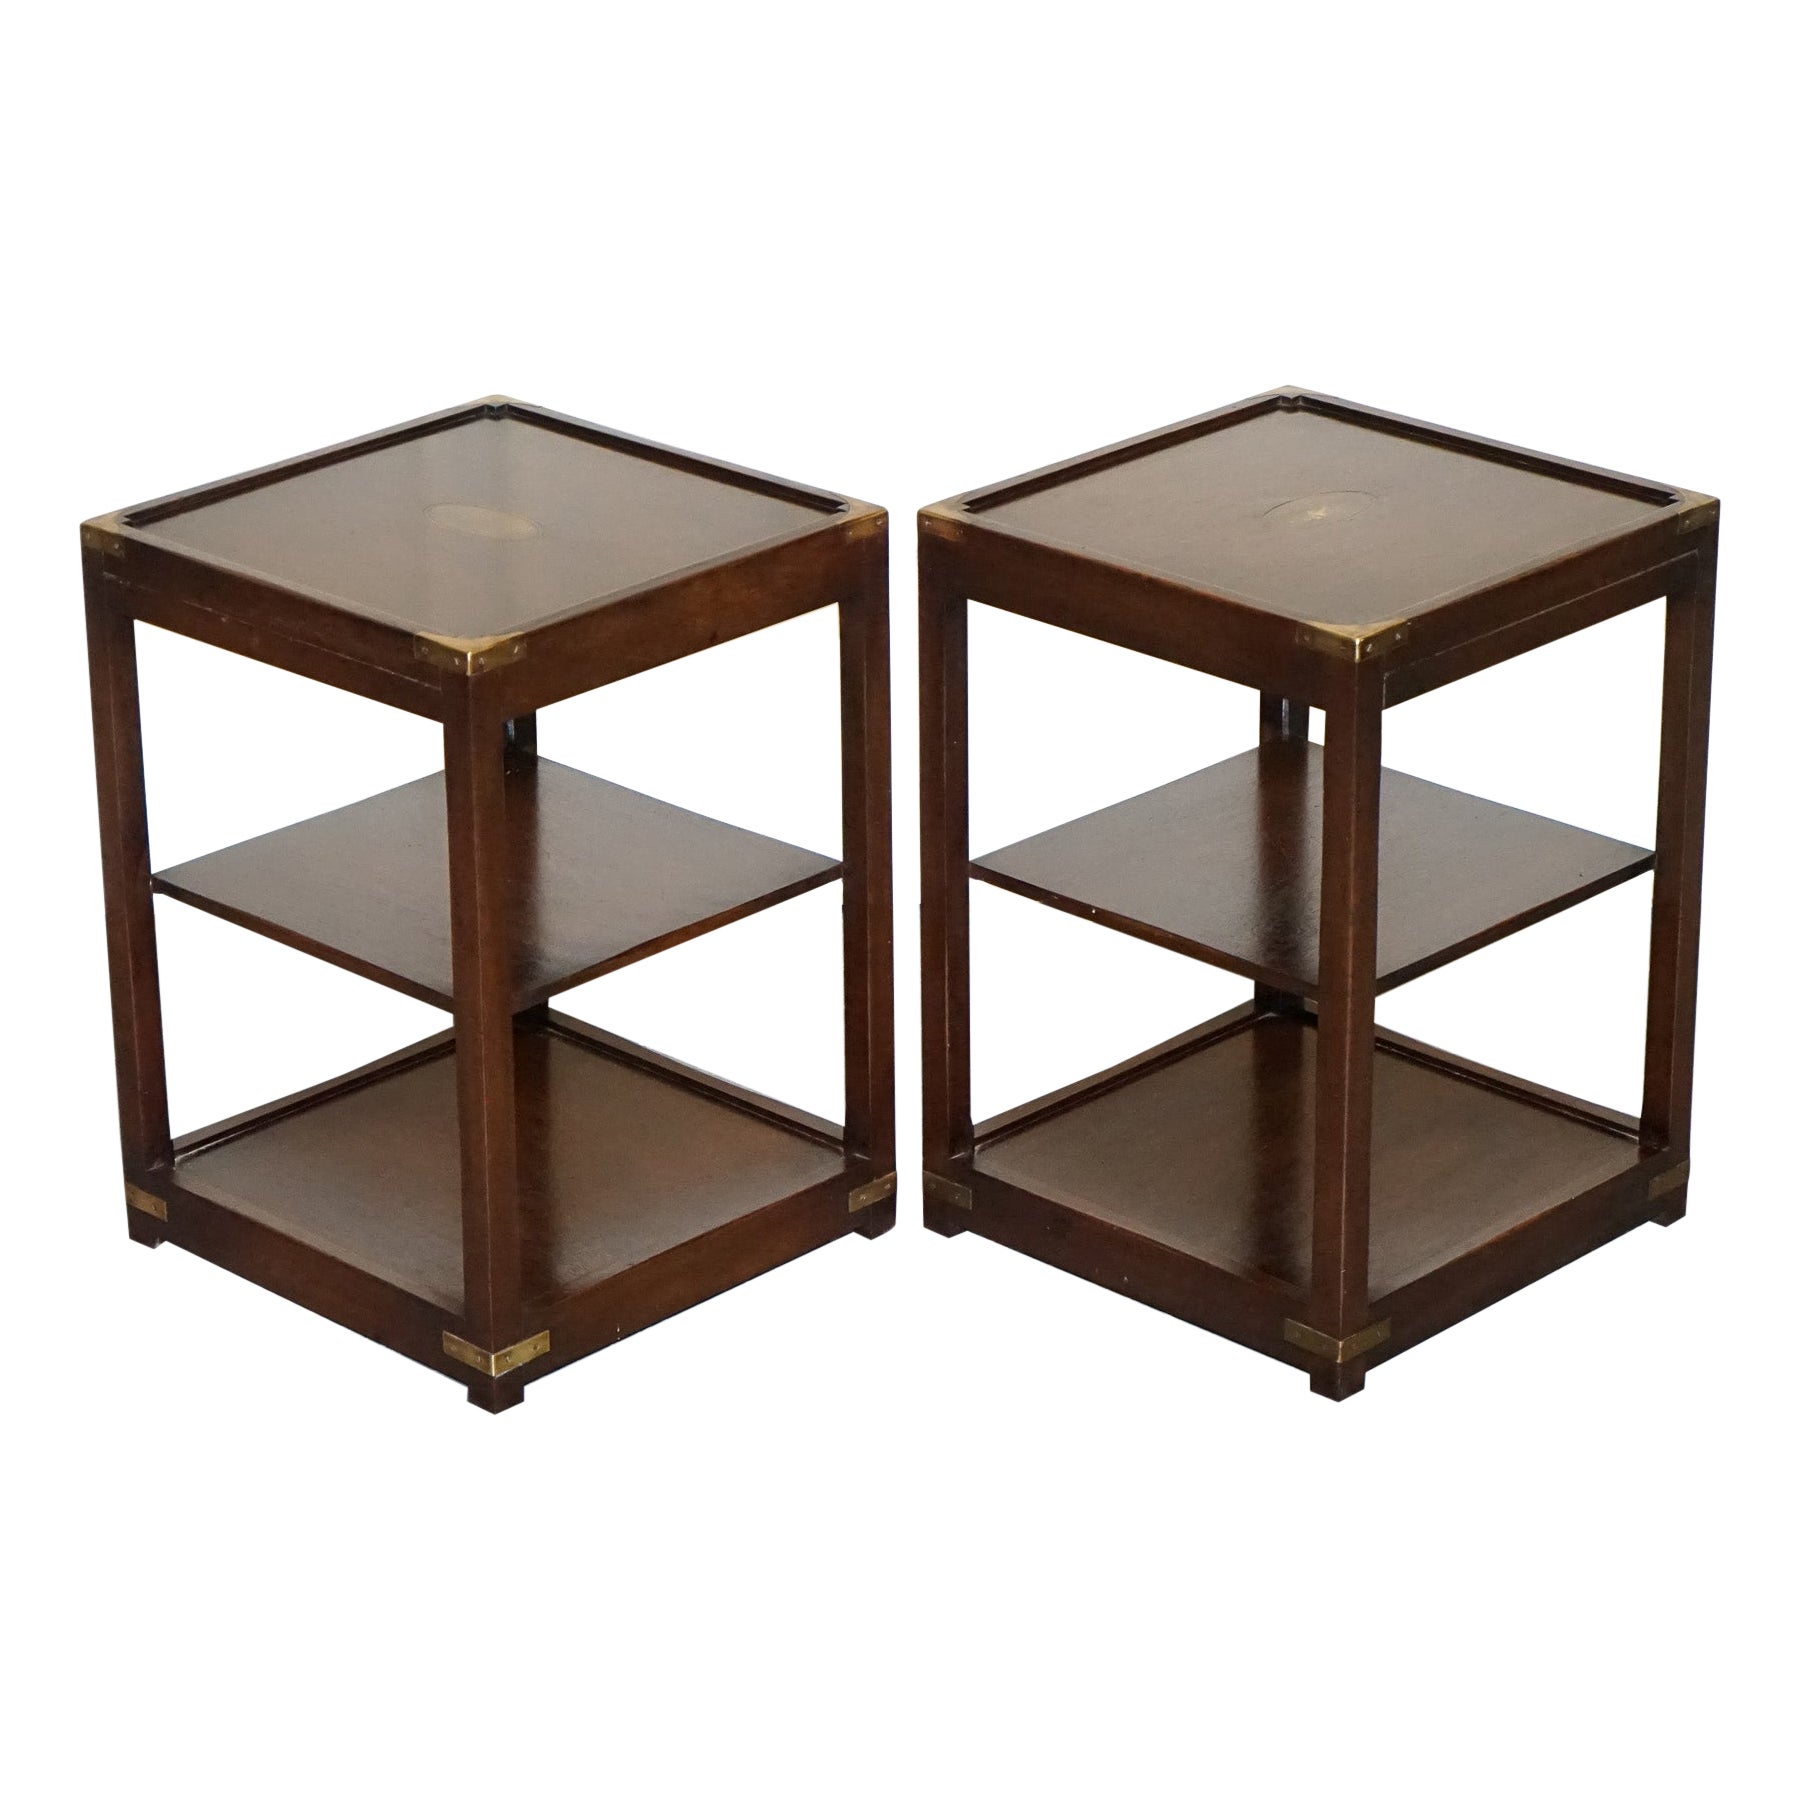 RESTORED PAiR OF HARRODS KENNEDY DOUBLE SIDED CAMPAIGN SIDE TABLES BUTLER TRAYS 